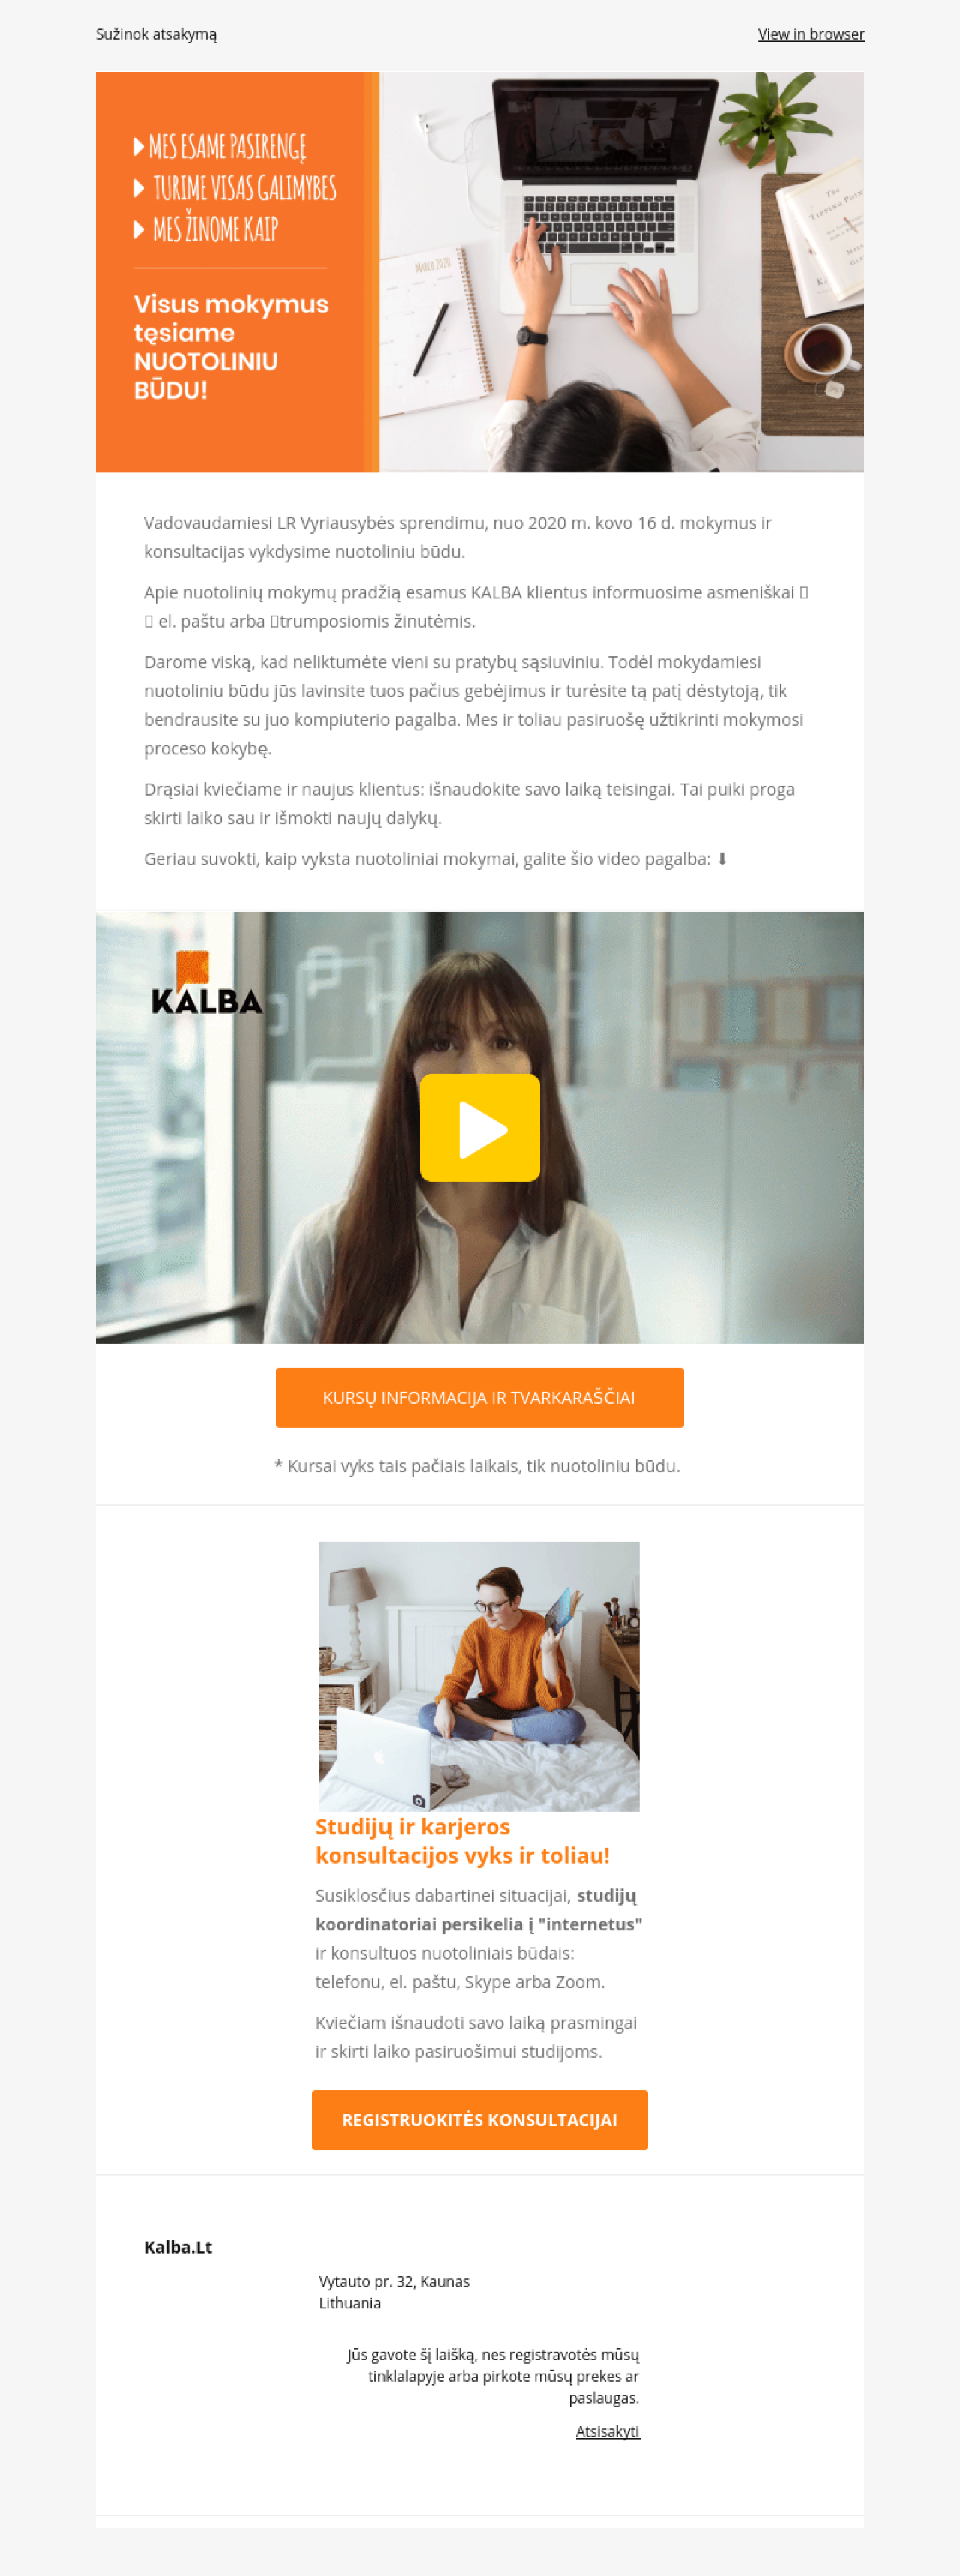 Kalba.Lt example - Made with MailerLite